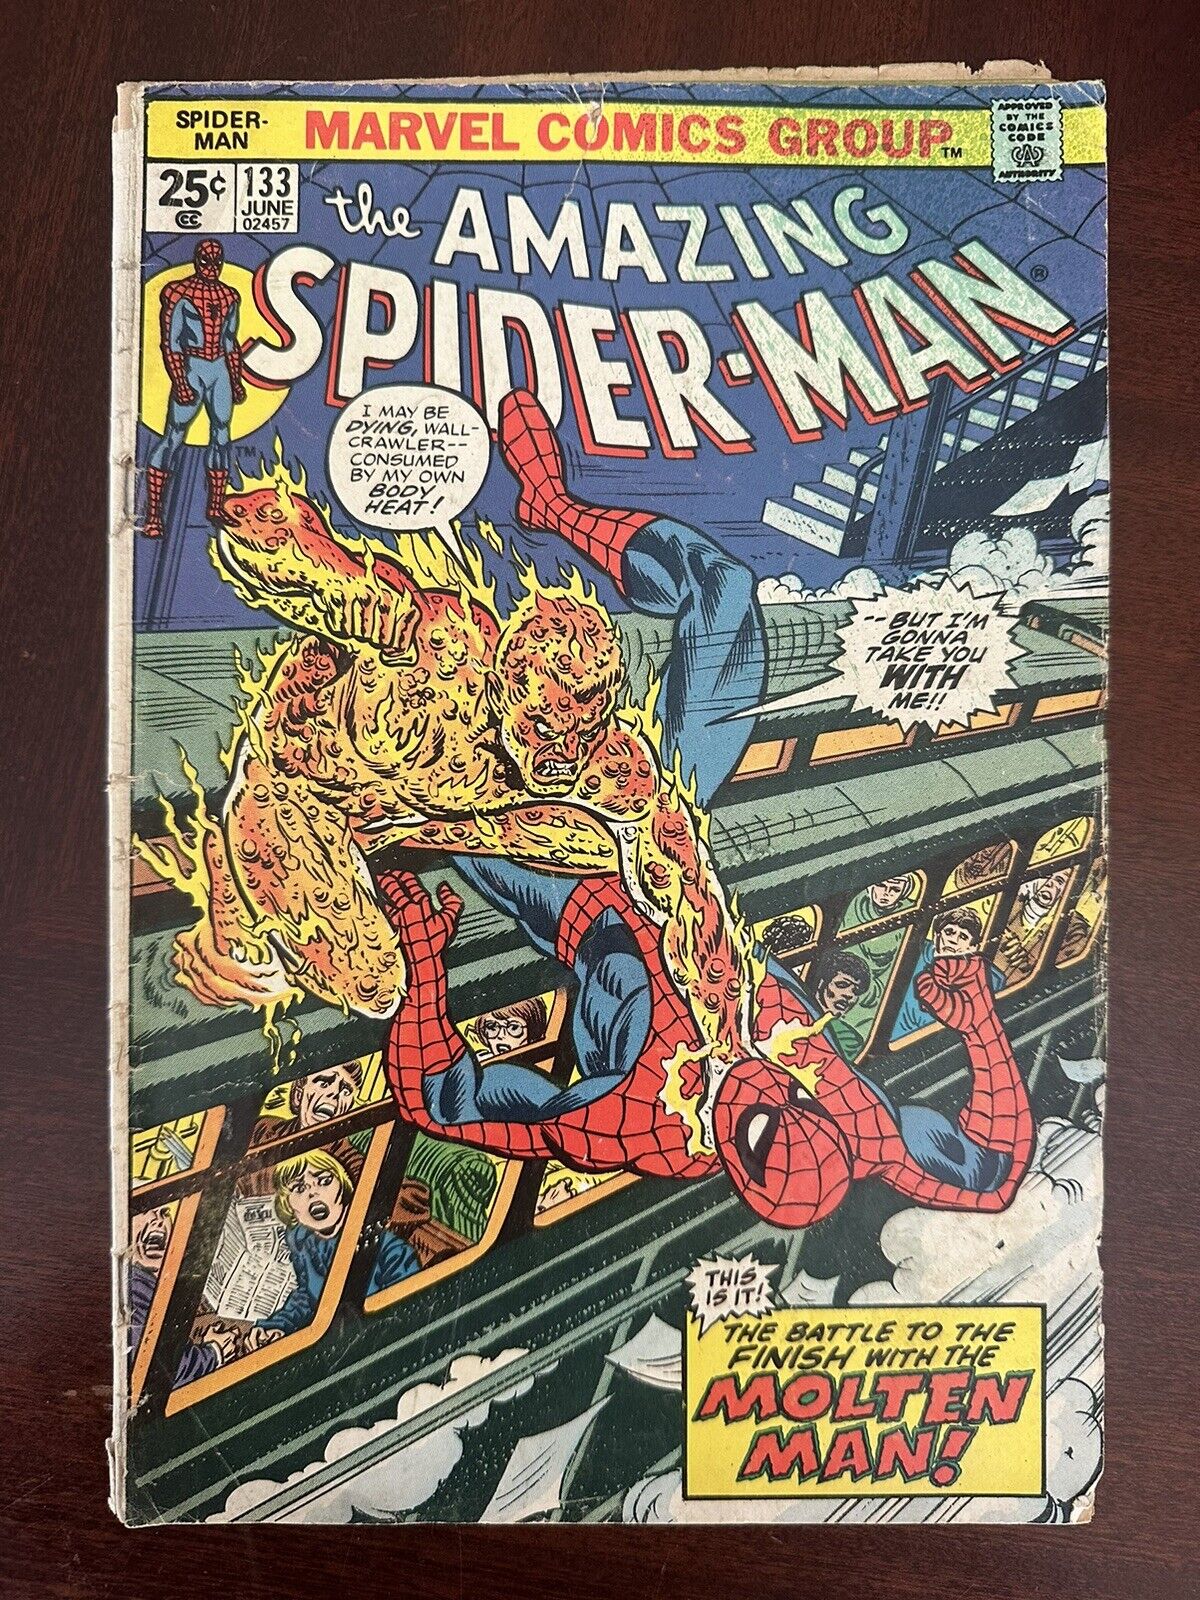 Amazing Spider-man #133 - really old Marvel comic